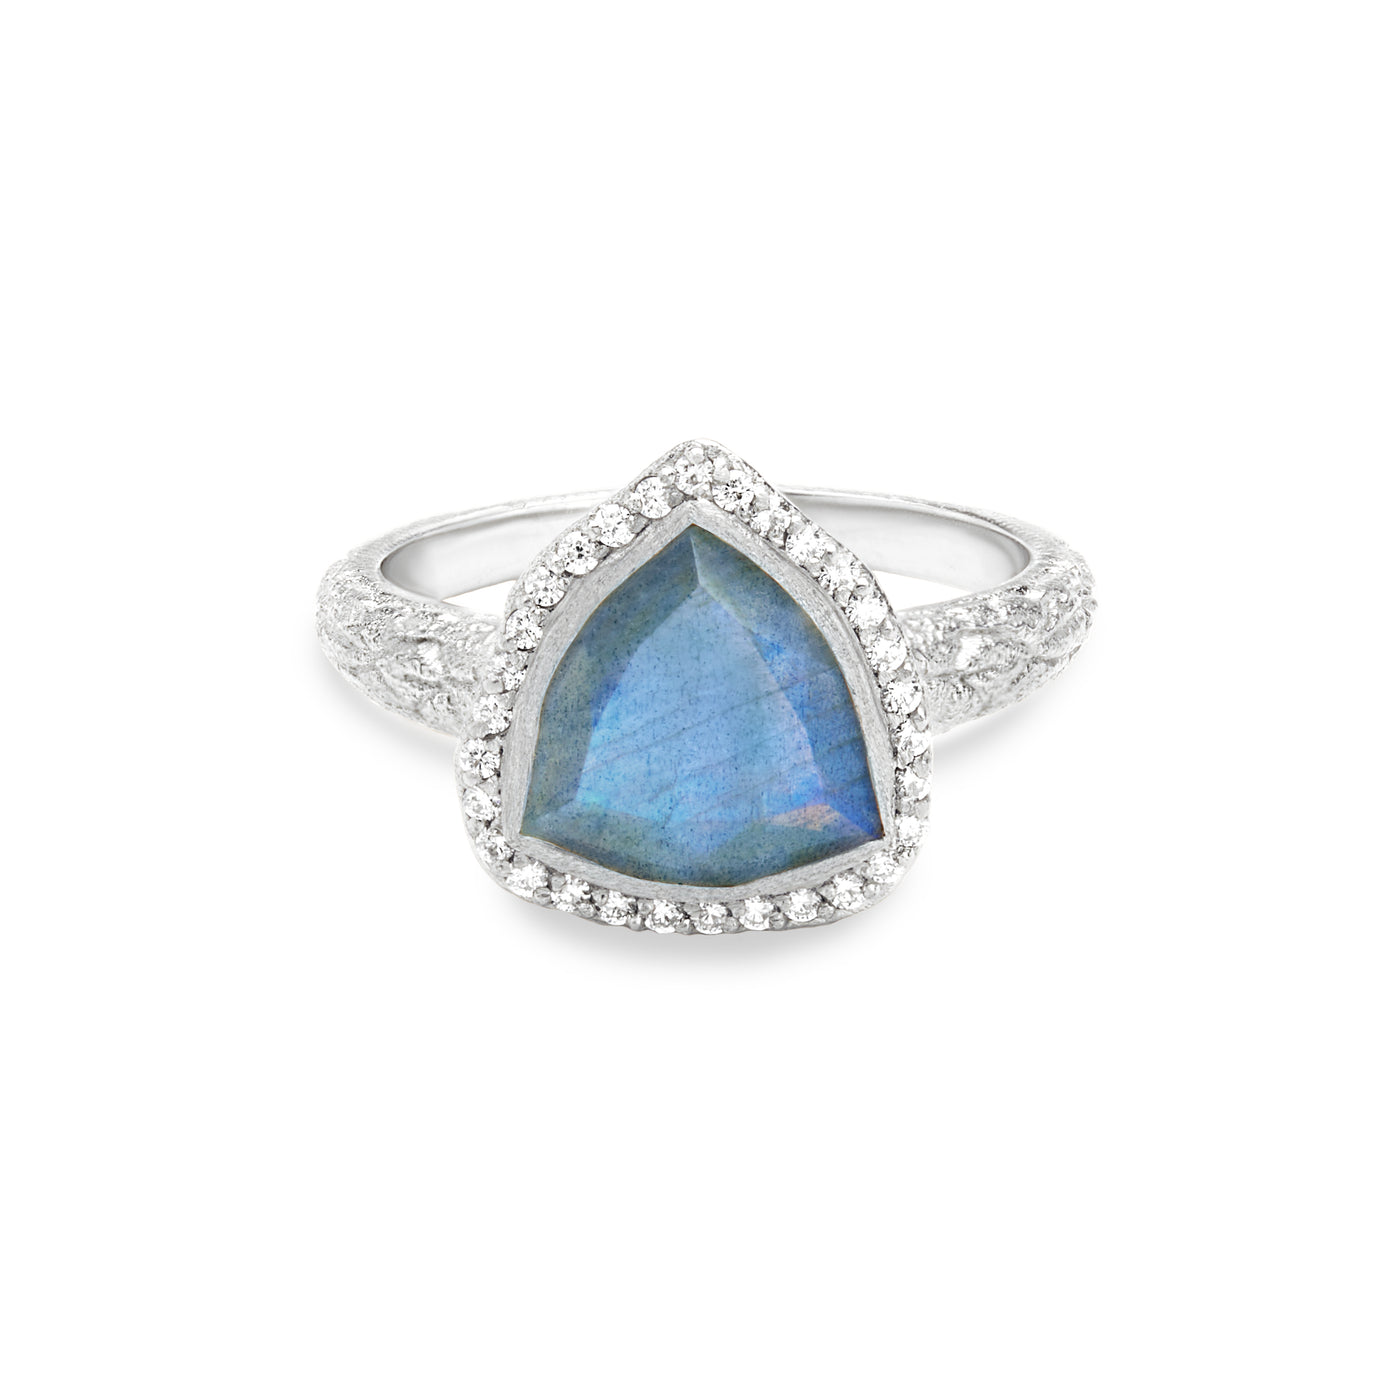 14 Karat White Gold Ring with Triangle Shaped Labradorite with Halo of White Diamonds Against White Background